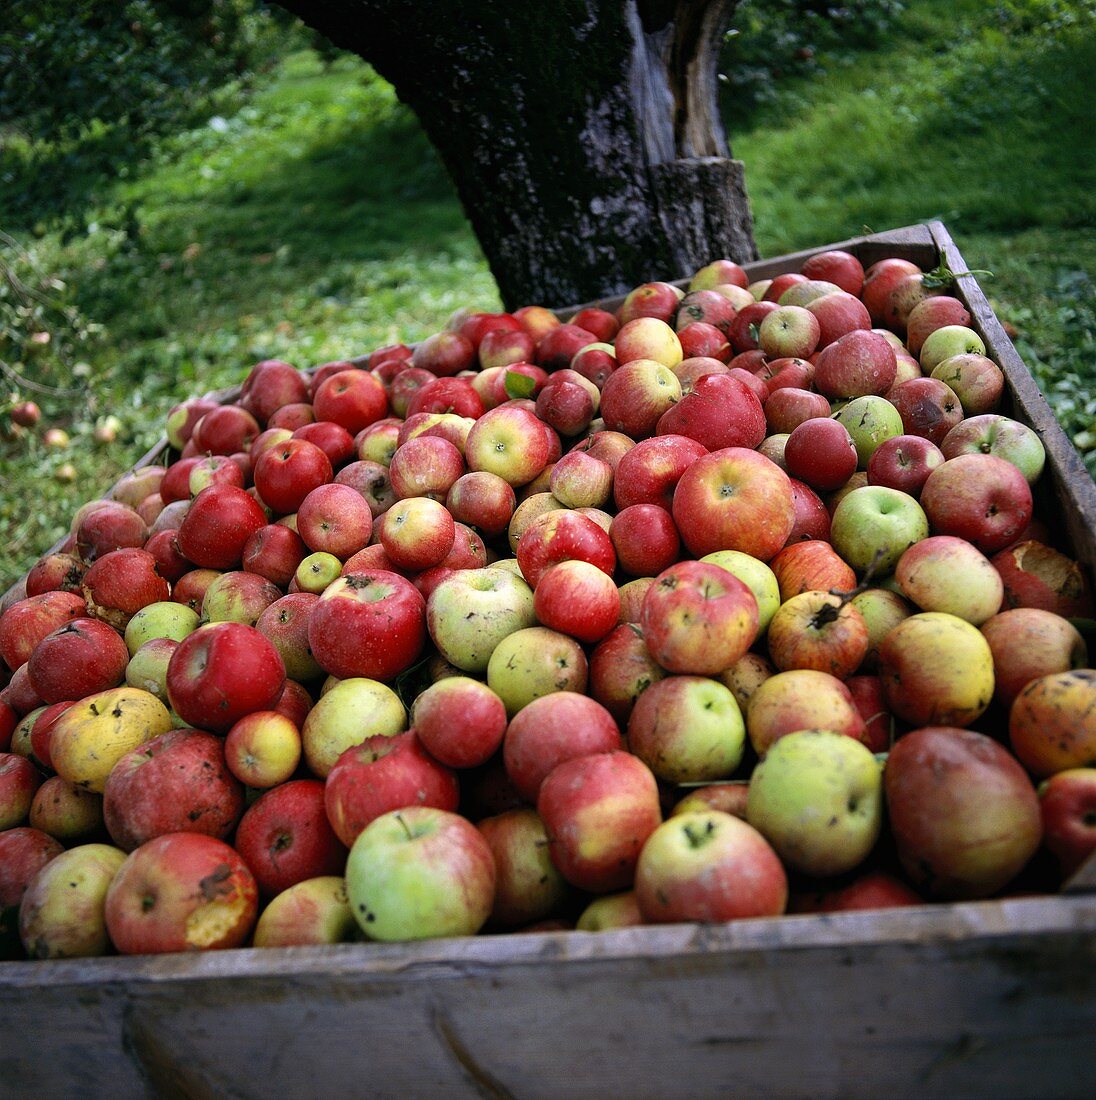 Freshly picked apples in a wooden crate in open air